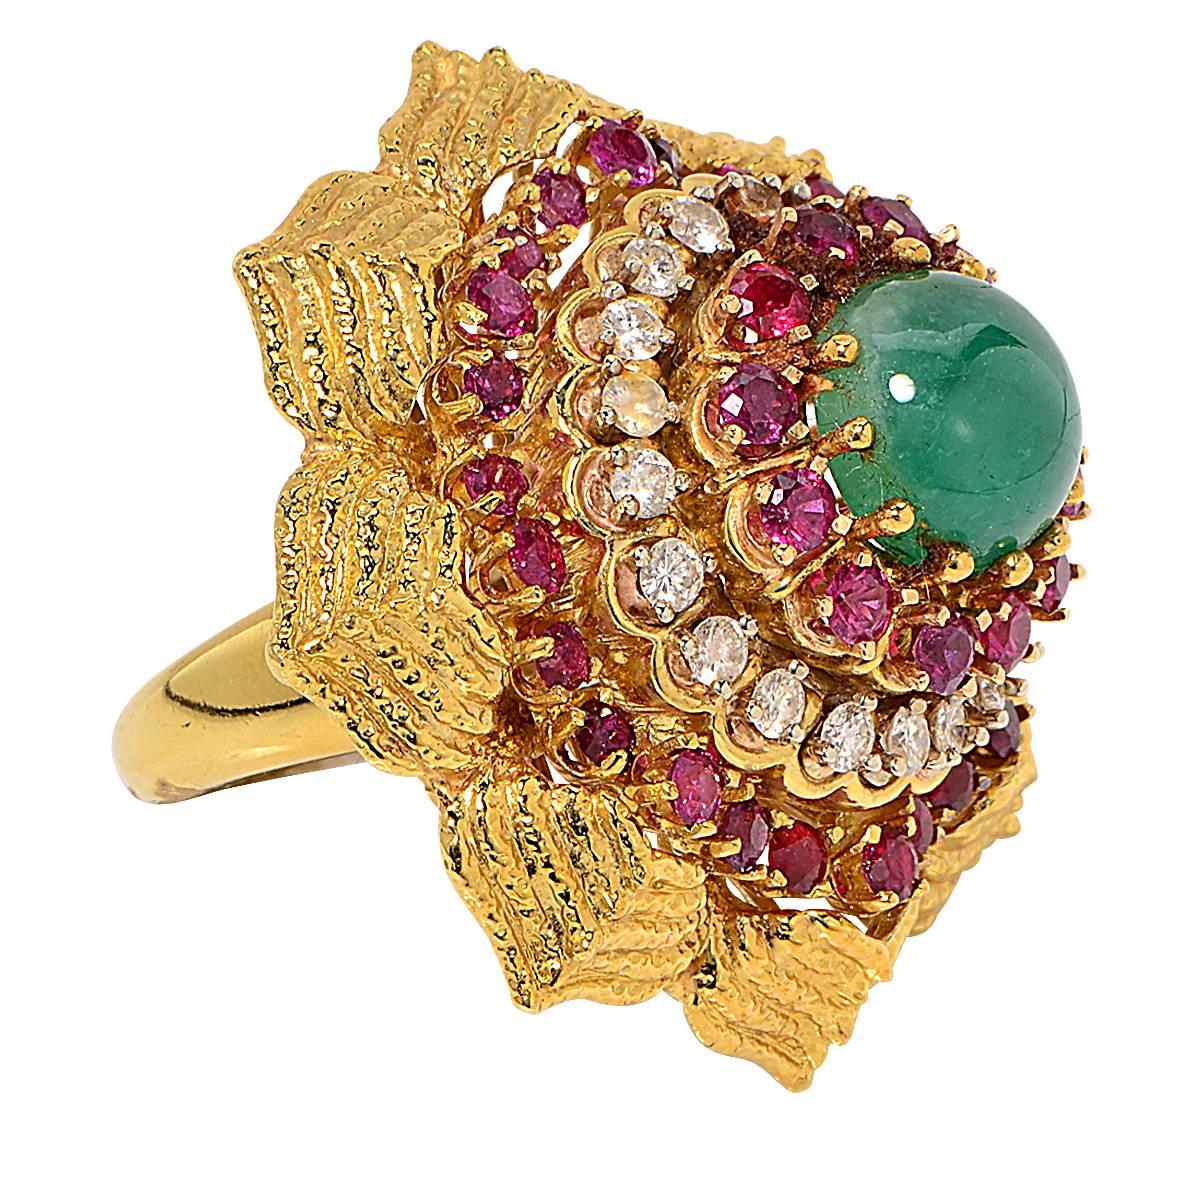 18 Karat Yellow Gold Vintage Ring Featuring an Emerald Cabochon, Rubies and 20 Round Brilliant Cut Diamonds Weighing Approximately 1.60cts, G Color, VS Clarity. Ring Size 7.